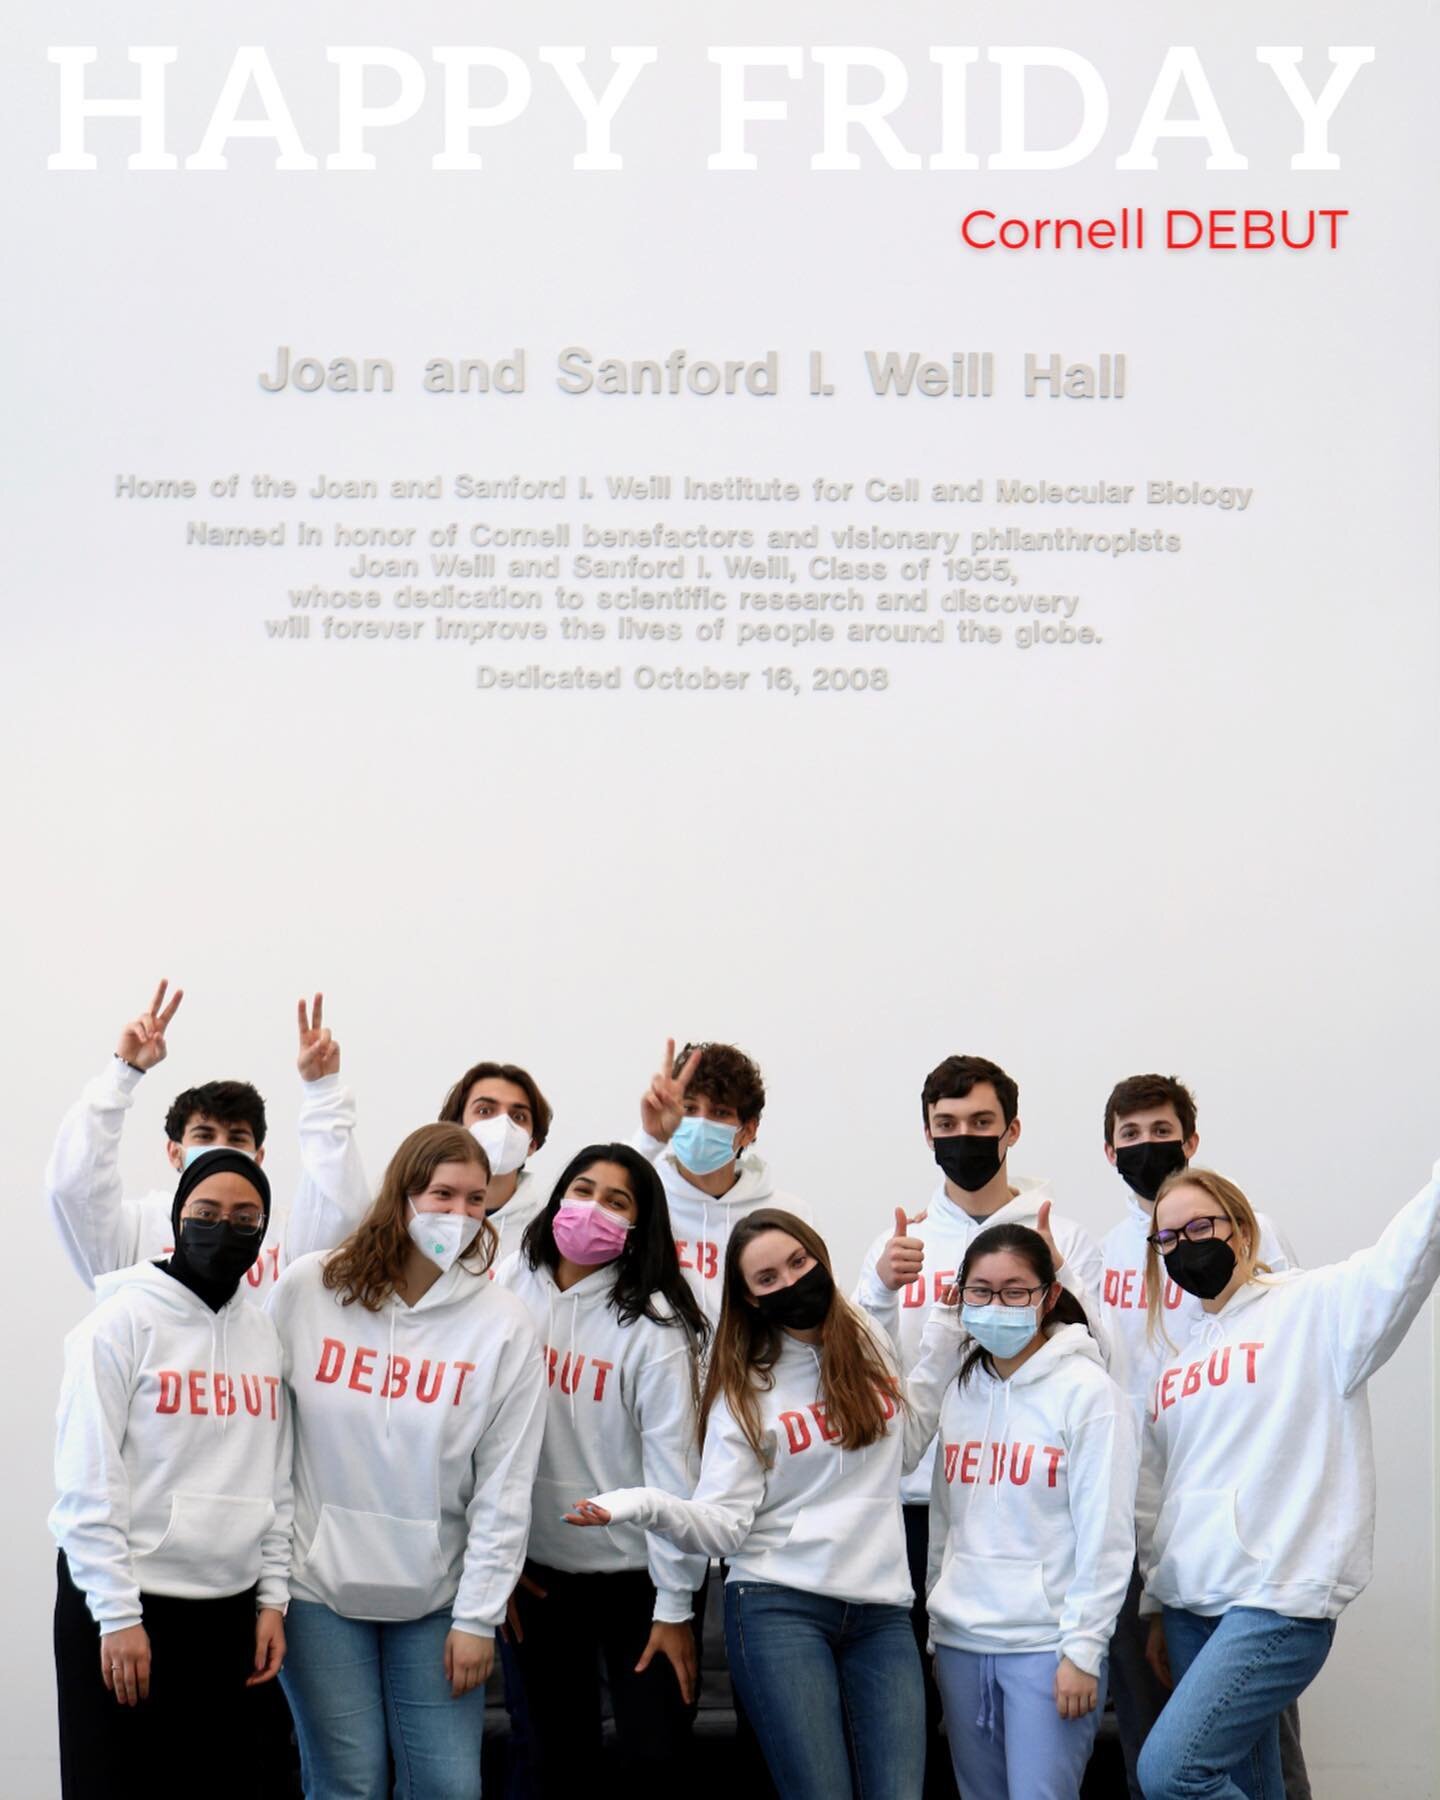 Wishing you a Happy Friday and a great weekend, Cornell! 🥳❄️☃️🎉🎊🧬🦠

#cornell #cornelleng #projectteam #cornelluniversity 

(Ft our new hoodies!)